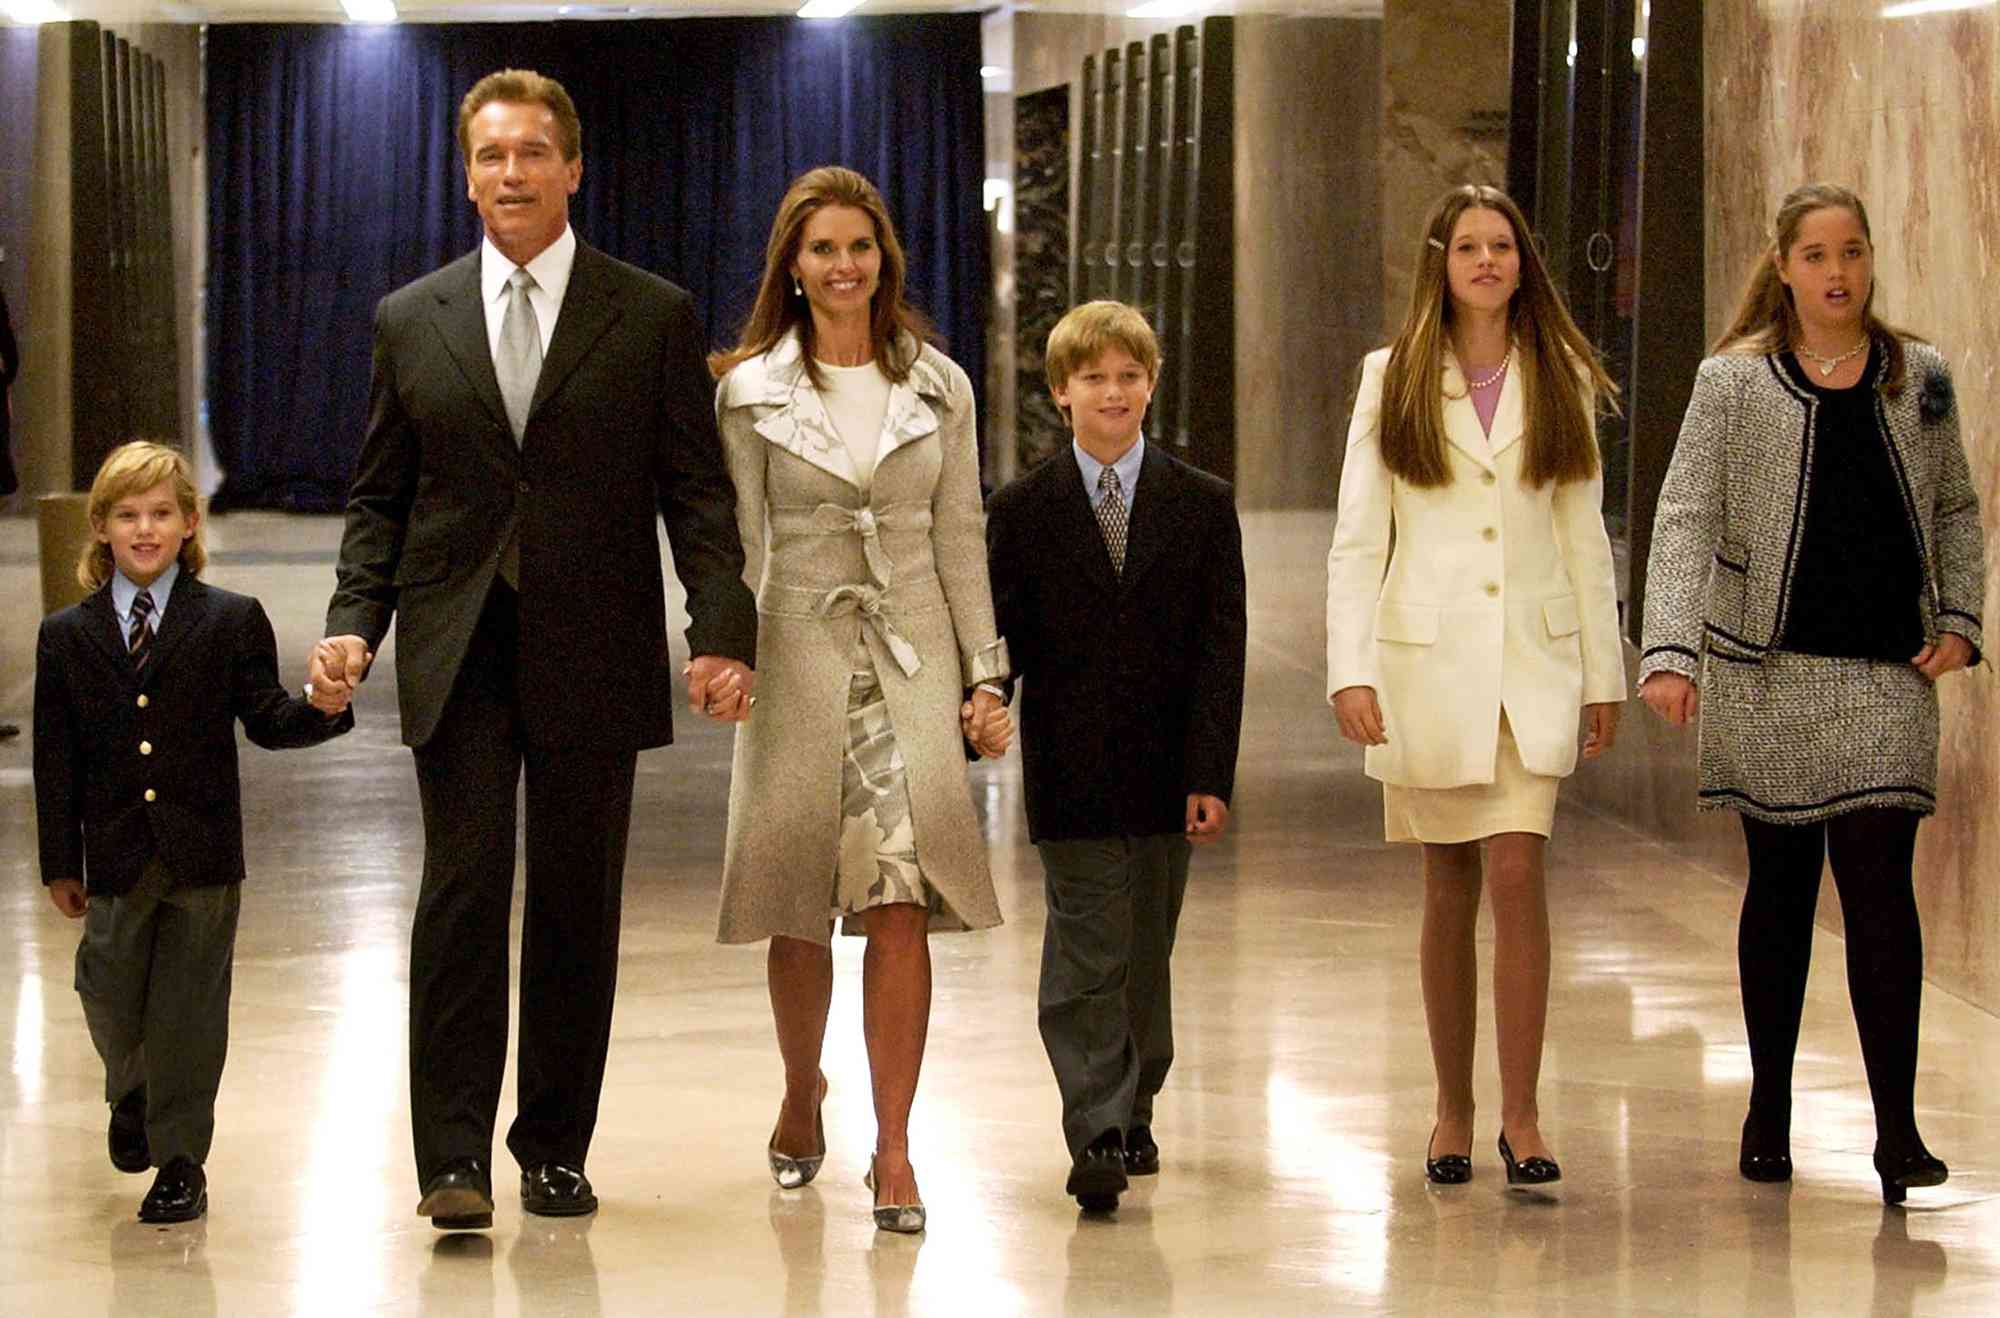 Arnold Schwarzenegger walks with his wife Maria Shriver and their four children to his inaugural ceremony at the State Capitol in Sacramento on Novemeber 17, 2003 in Sacramento, California